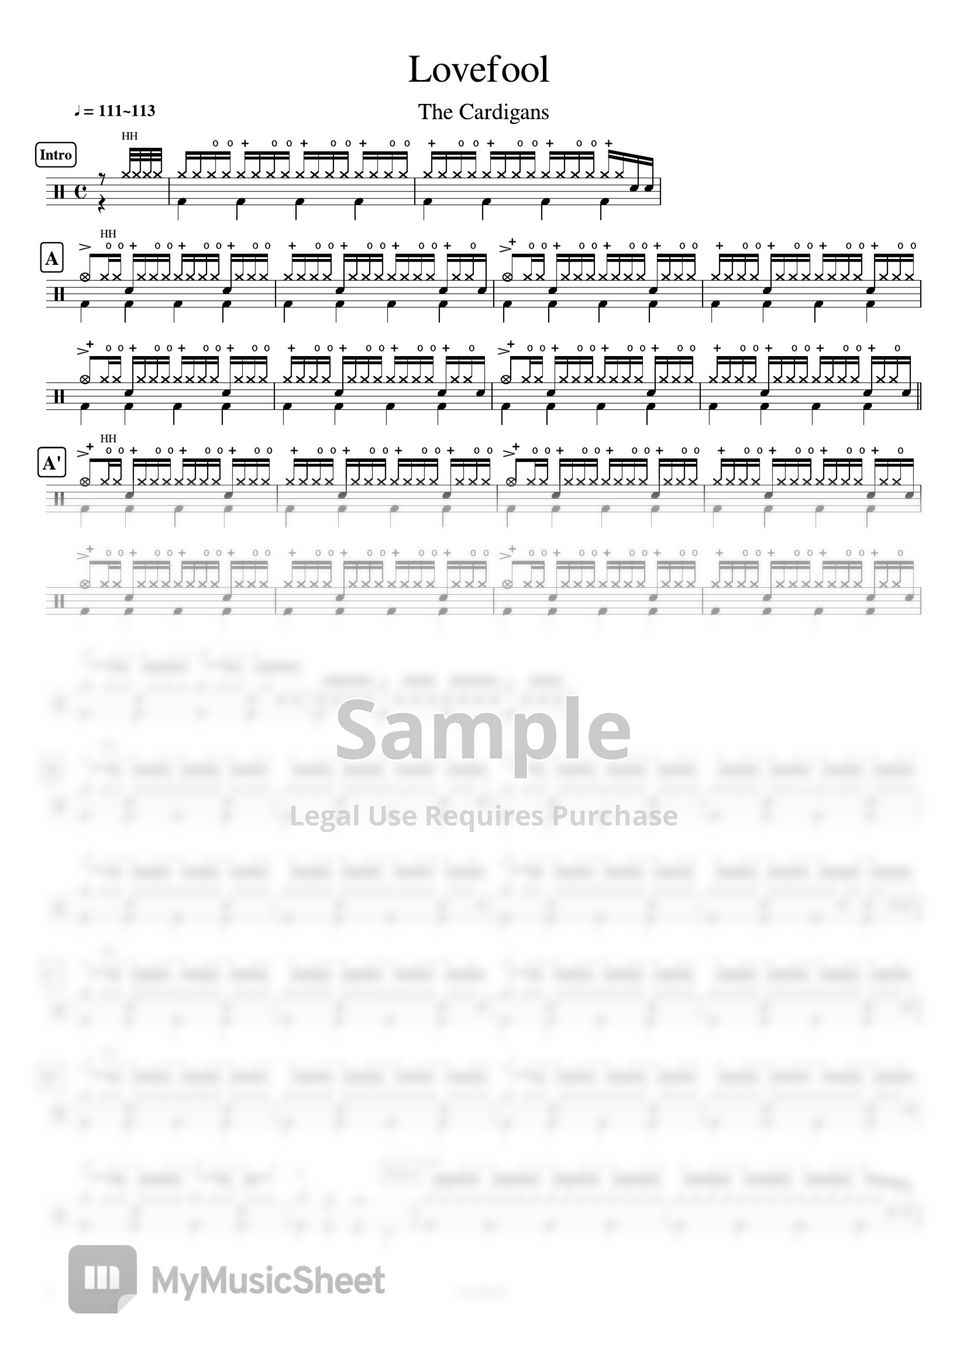 The Cardigans - Lovefool by Cookai's J-pop Drum sheet music!!!